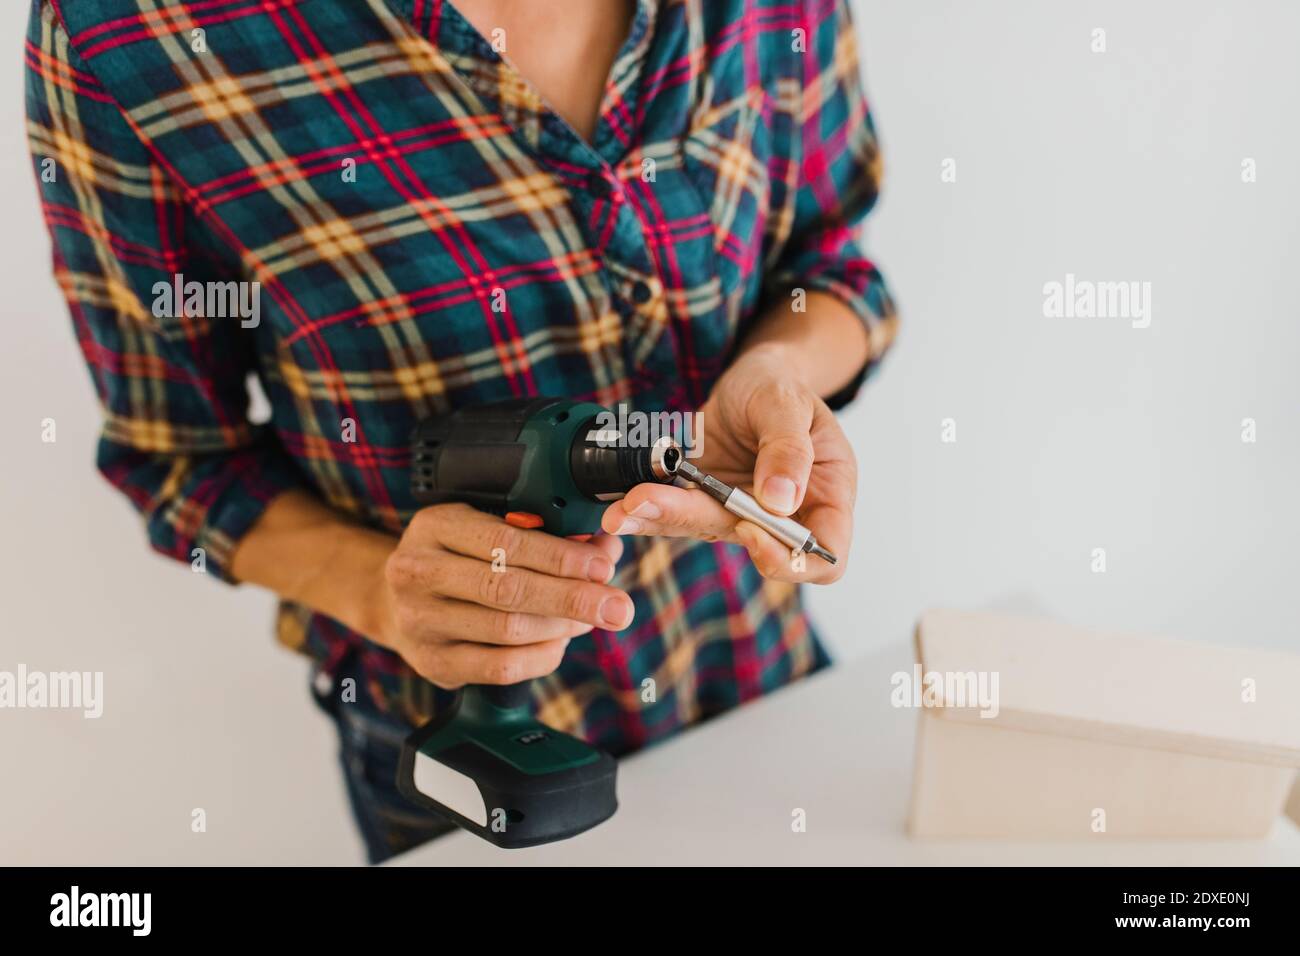 Woman putting screwdriver bit in power tool while standing at home Stock Photo